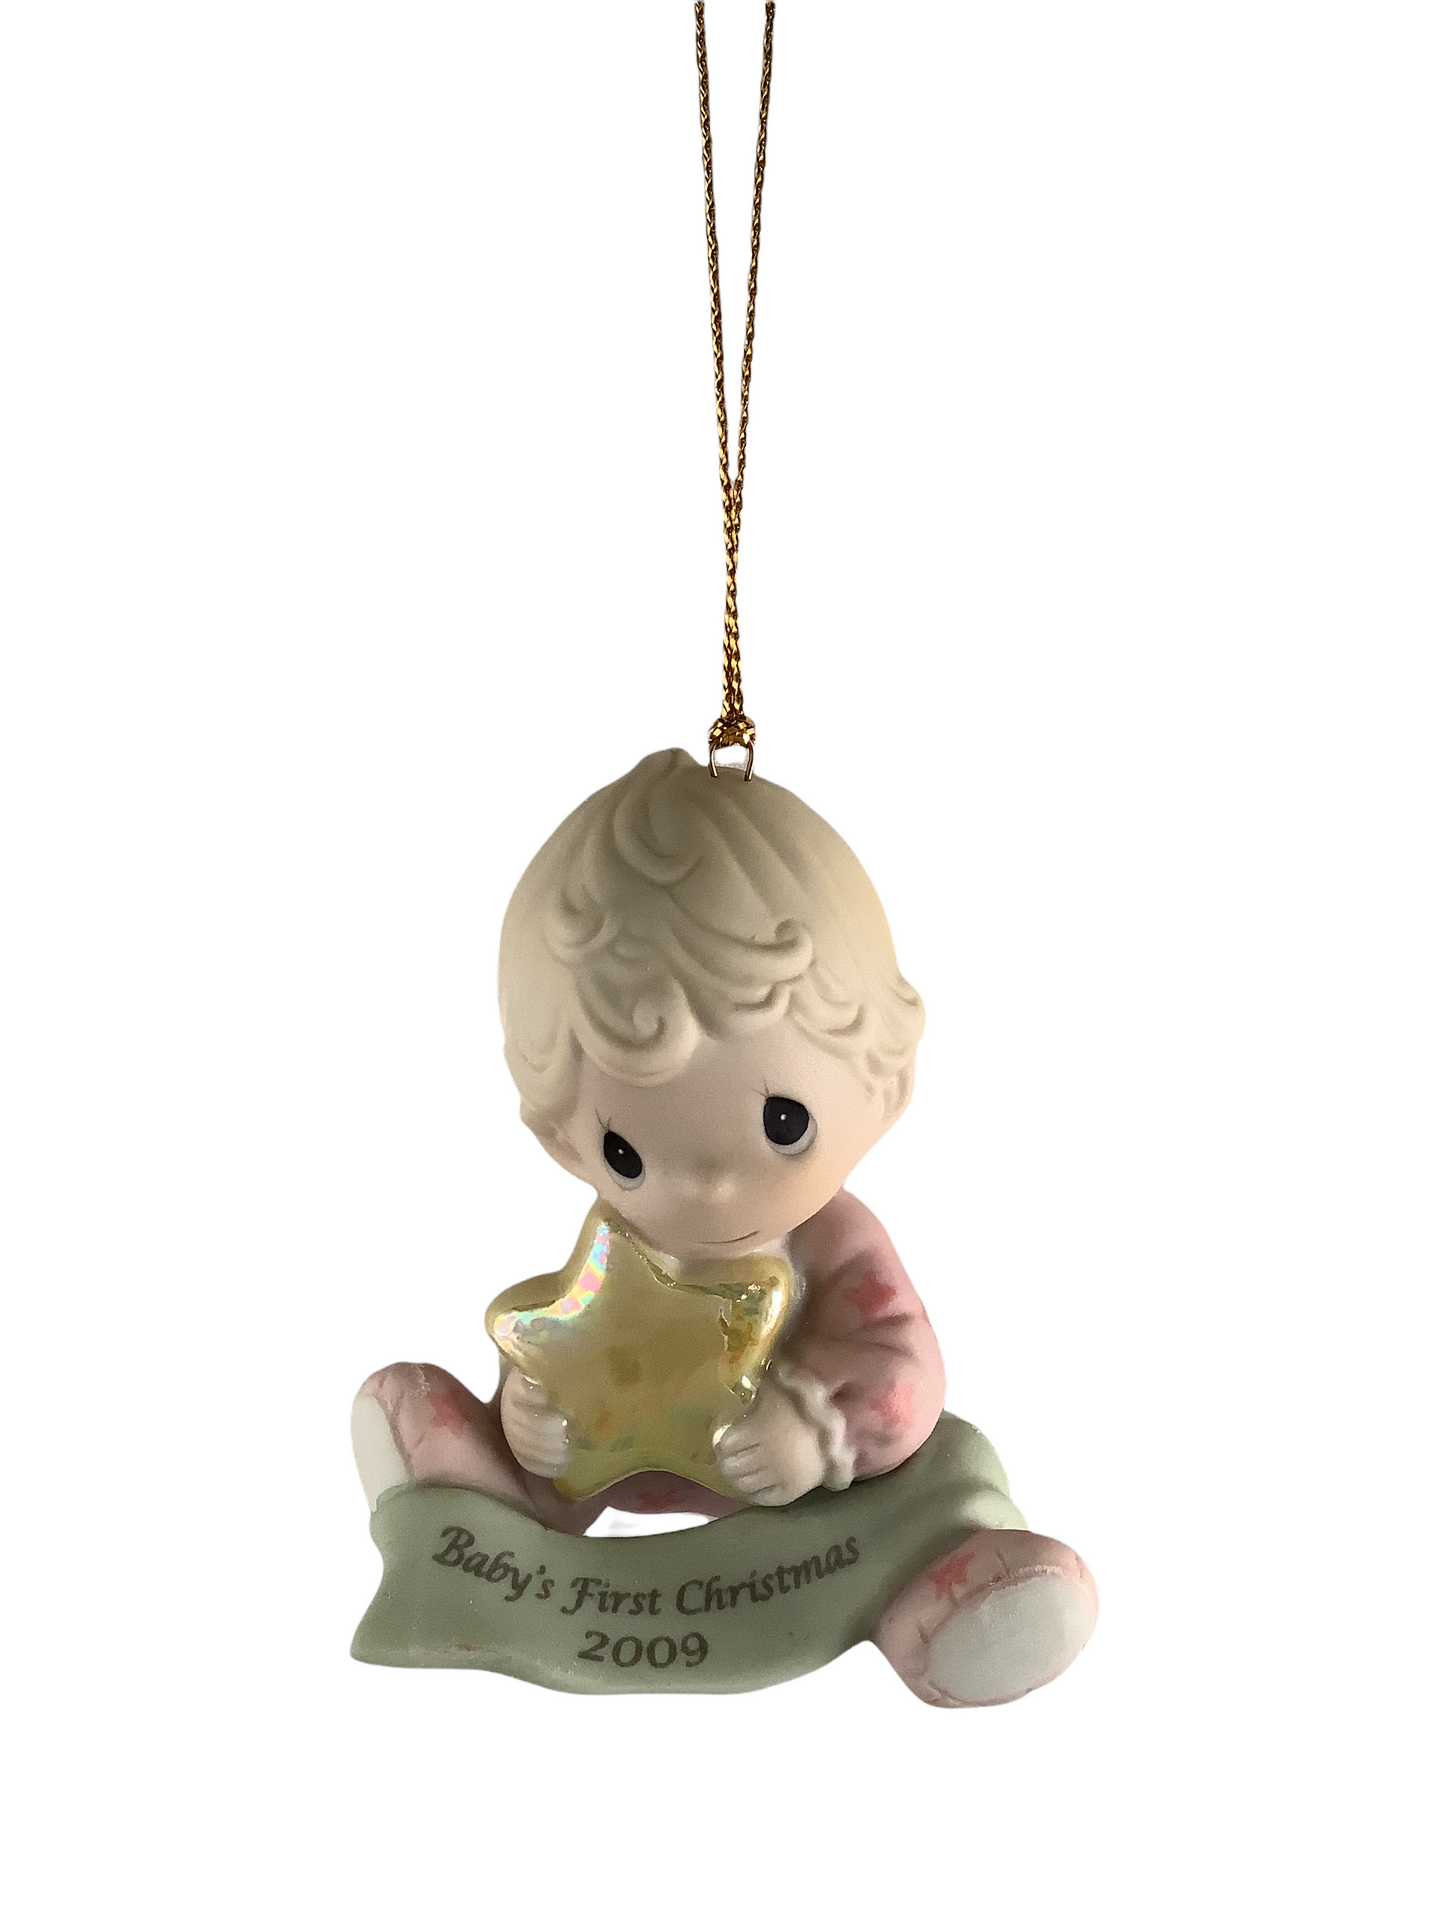 Baby's First Christmas 2009 (Girl) - Precious Moment Ornament